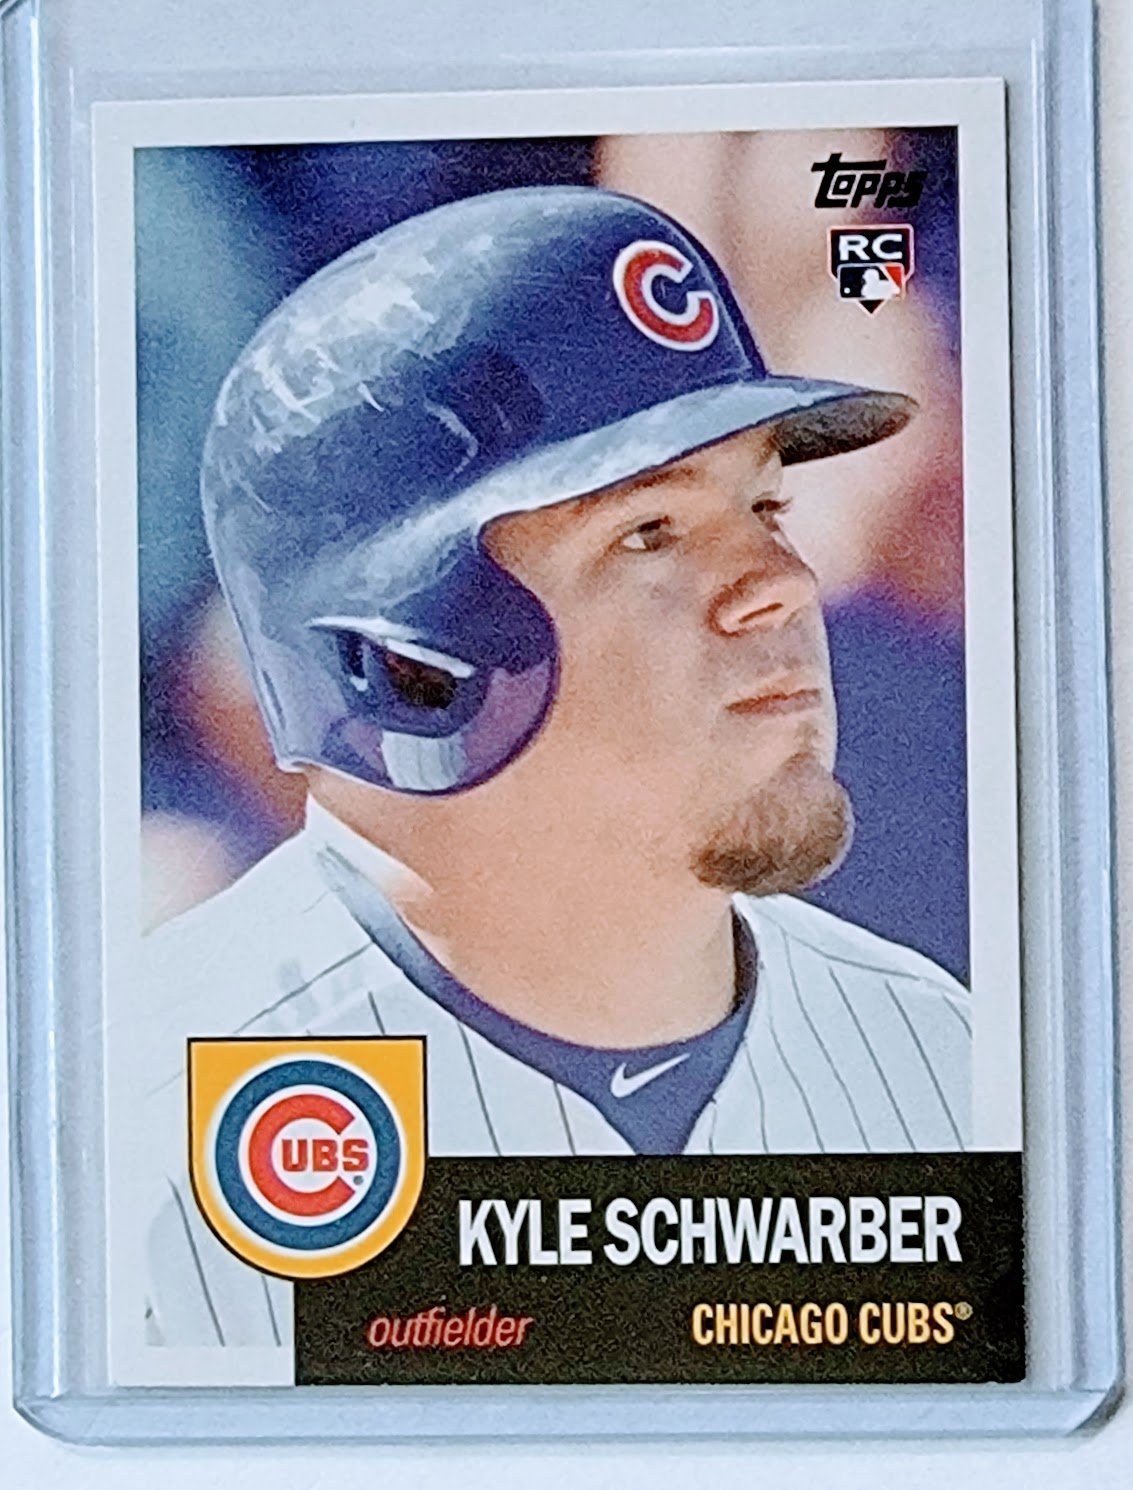 2016 Topps Archive Kyle Schwarber Rookie Baseball Trading Card TPTV simple Xclusive Collectibles   